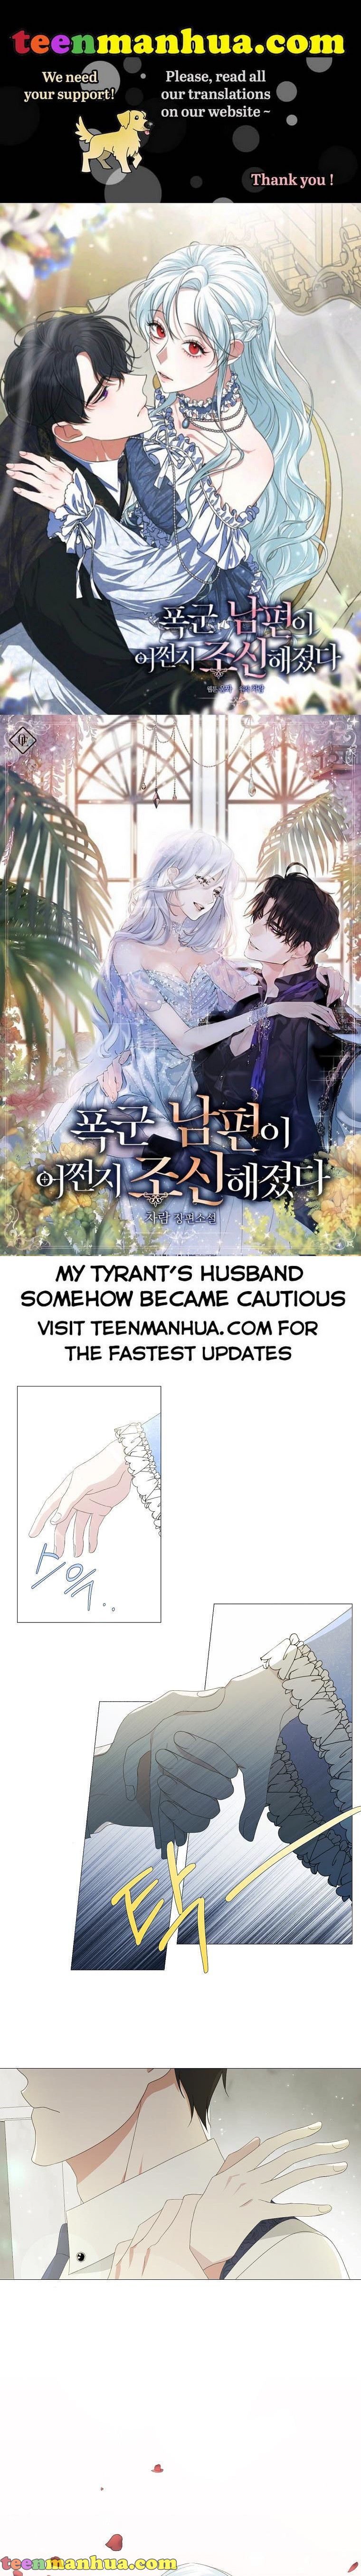 My tyrant’s husband somehow became cautious chapter 7